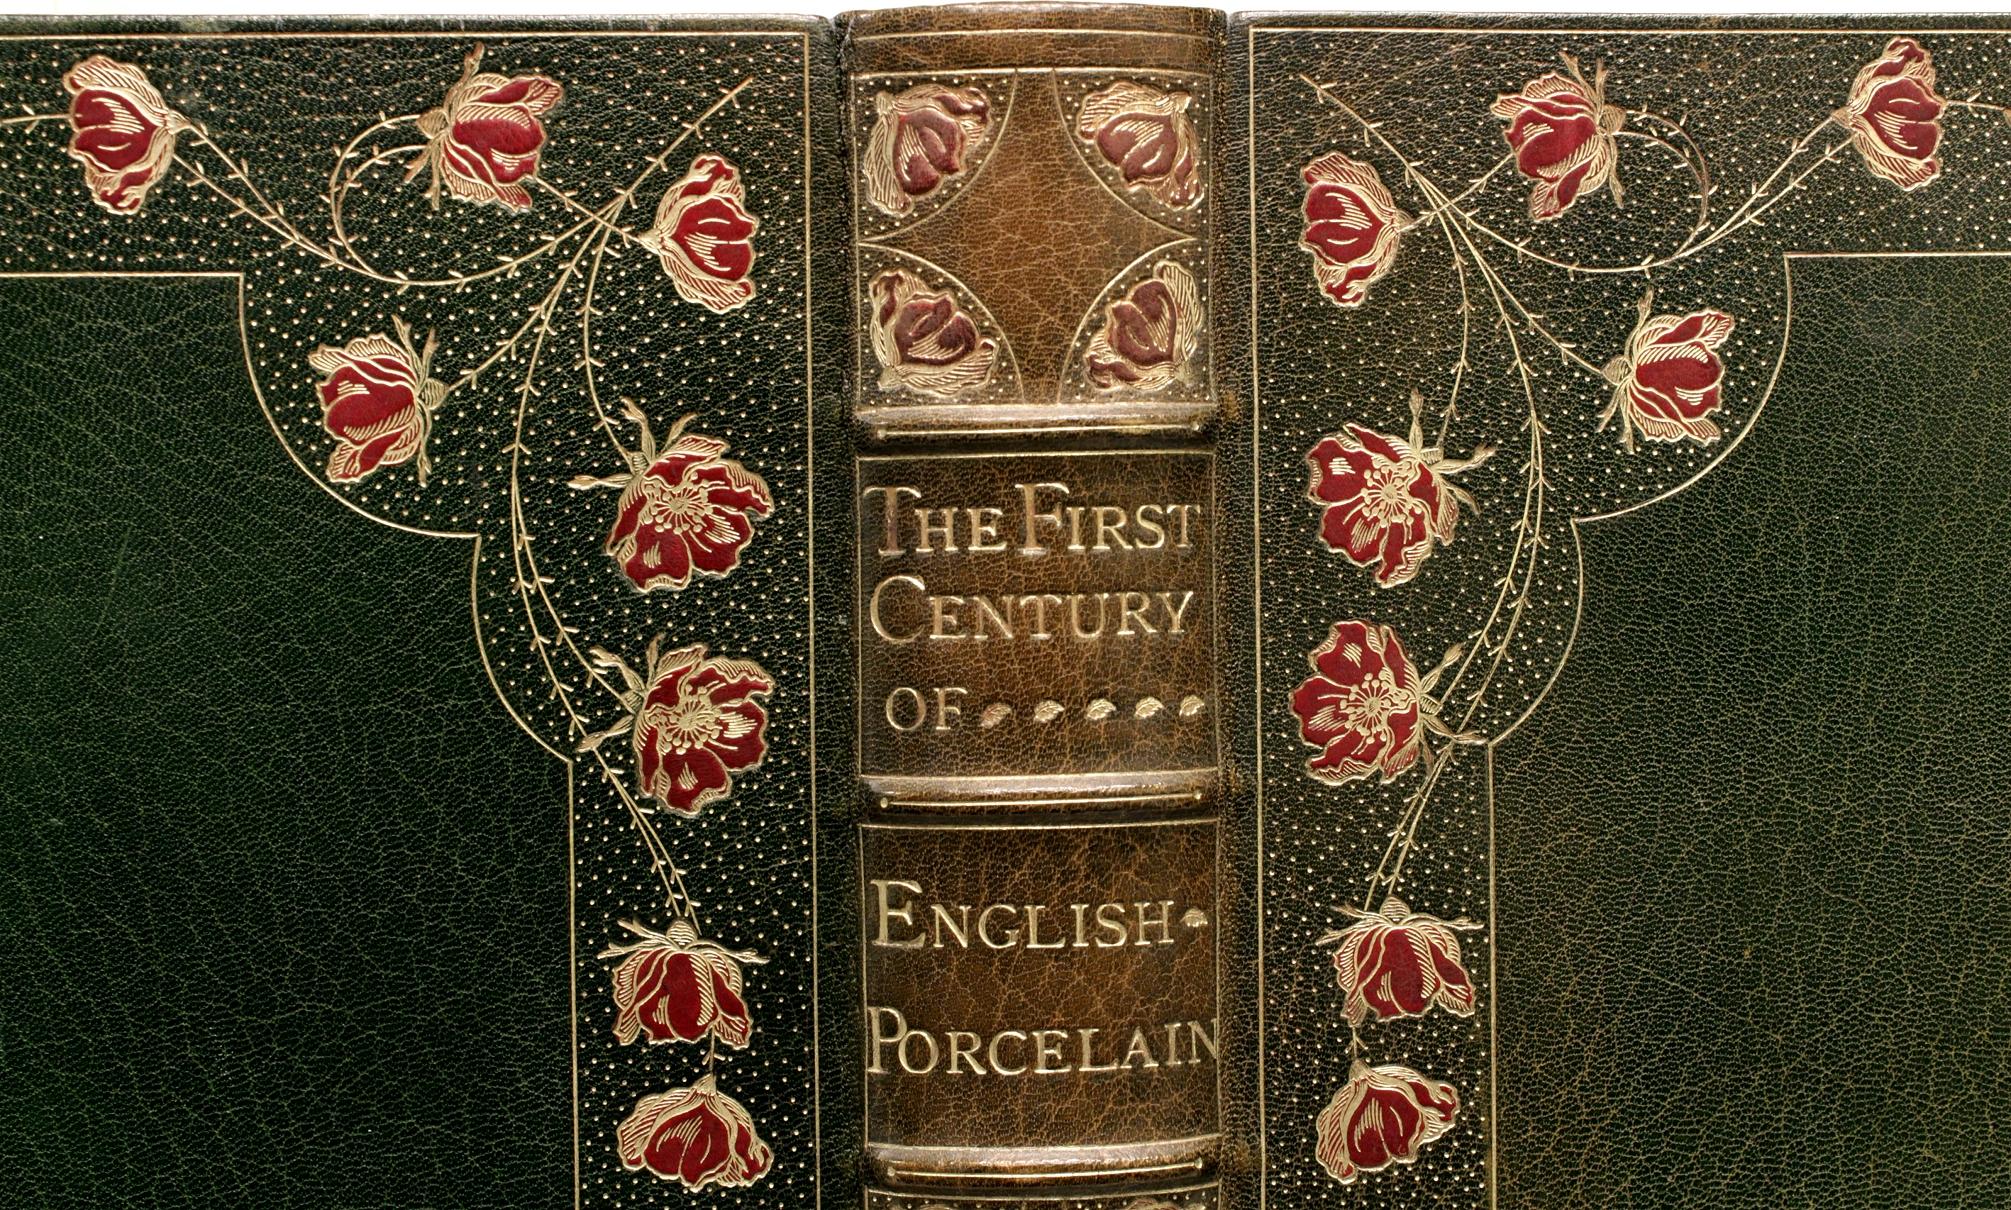 British First Century of English Porcelain by Binns, 1906, in a Beautiful Binding! For Sale